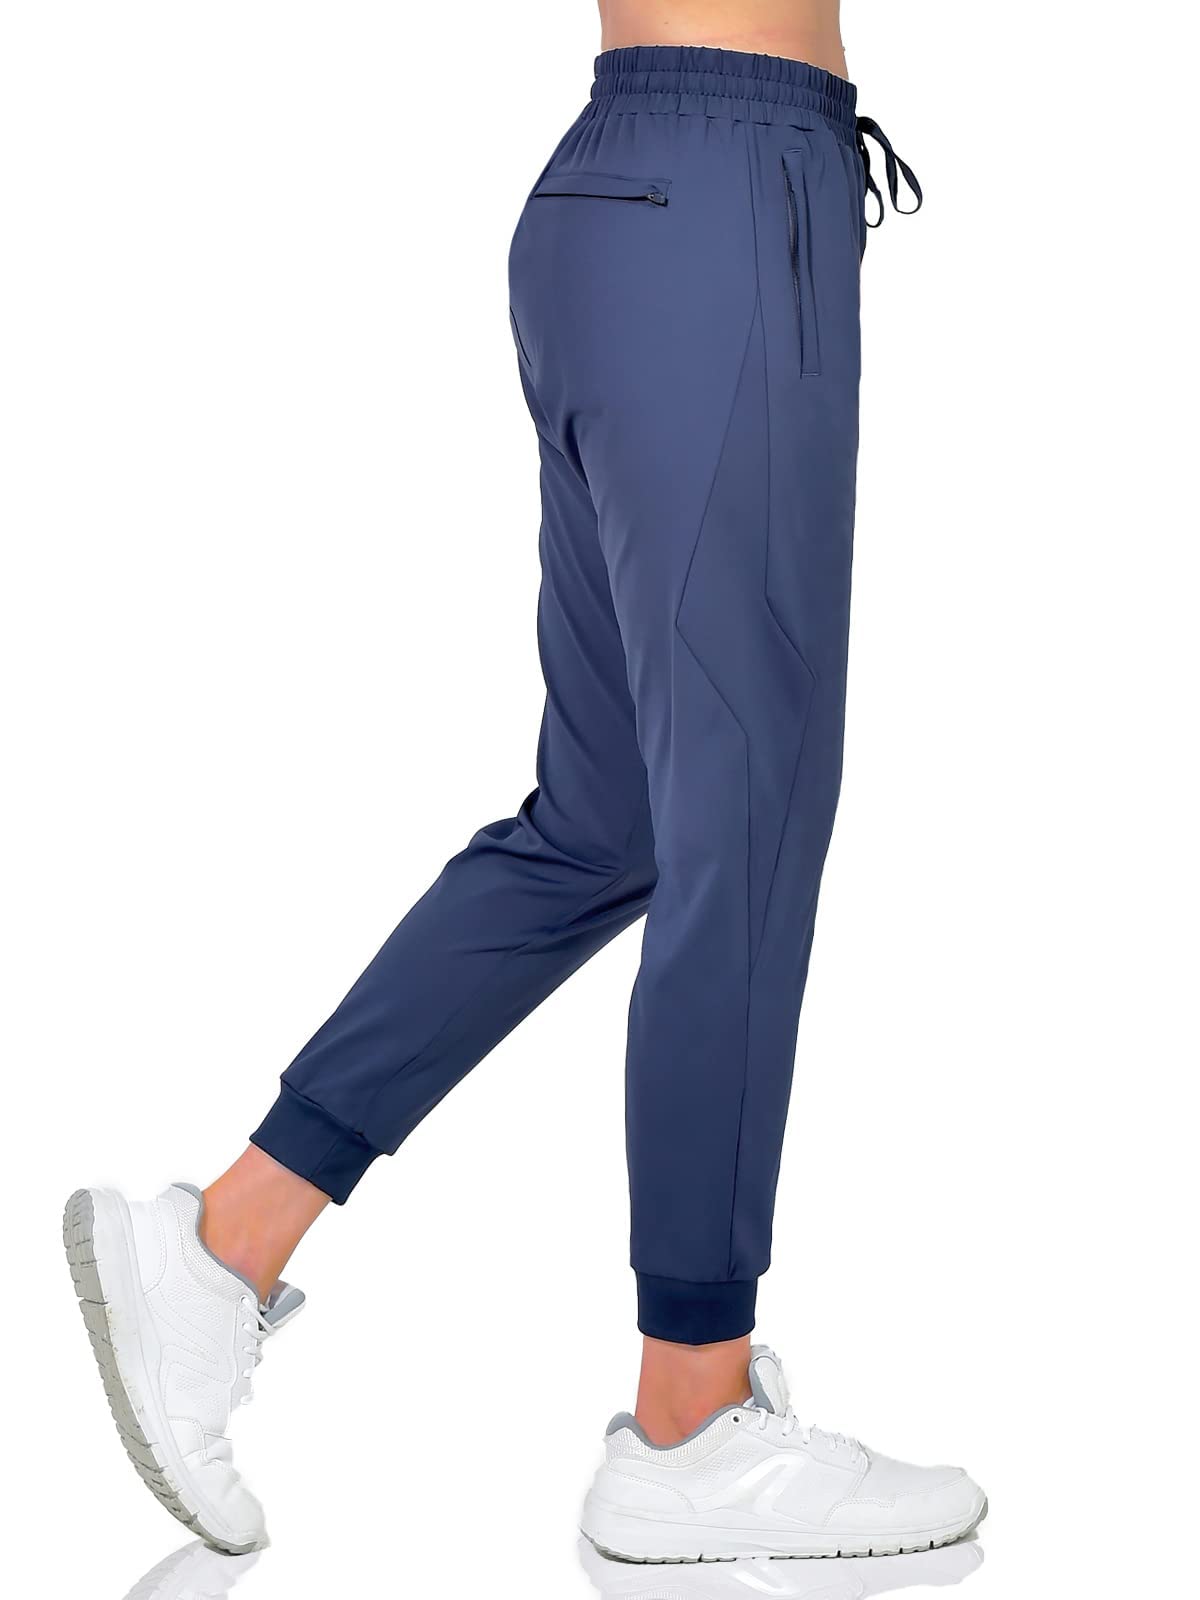 MYTREKALLY Women's Golf Pants Workout Gym Pants Joggers Athletic Tapered  Track Pants for Training, Running, Yoga Navy Large